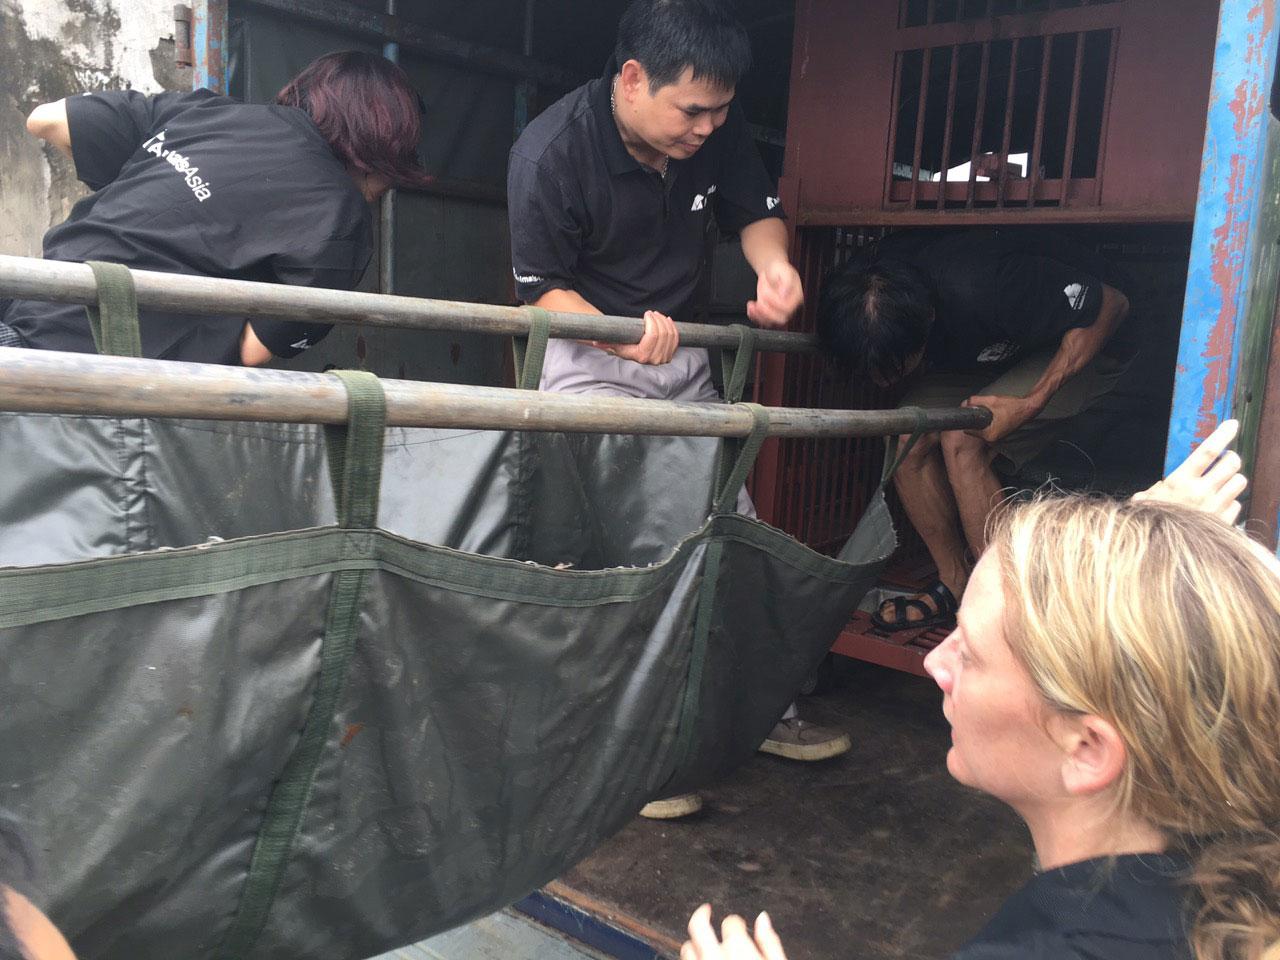 Rescue workers prepare Annemarie for transportation (Animals Asia/Flickr )